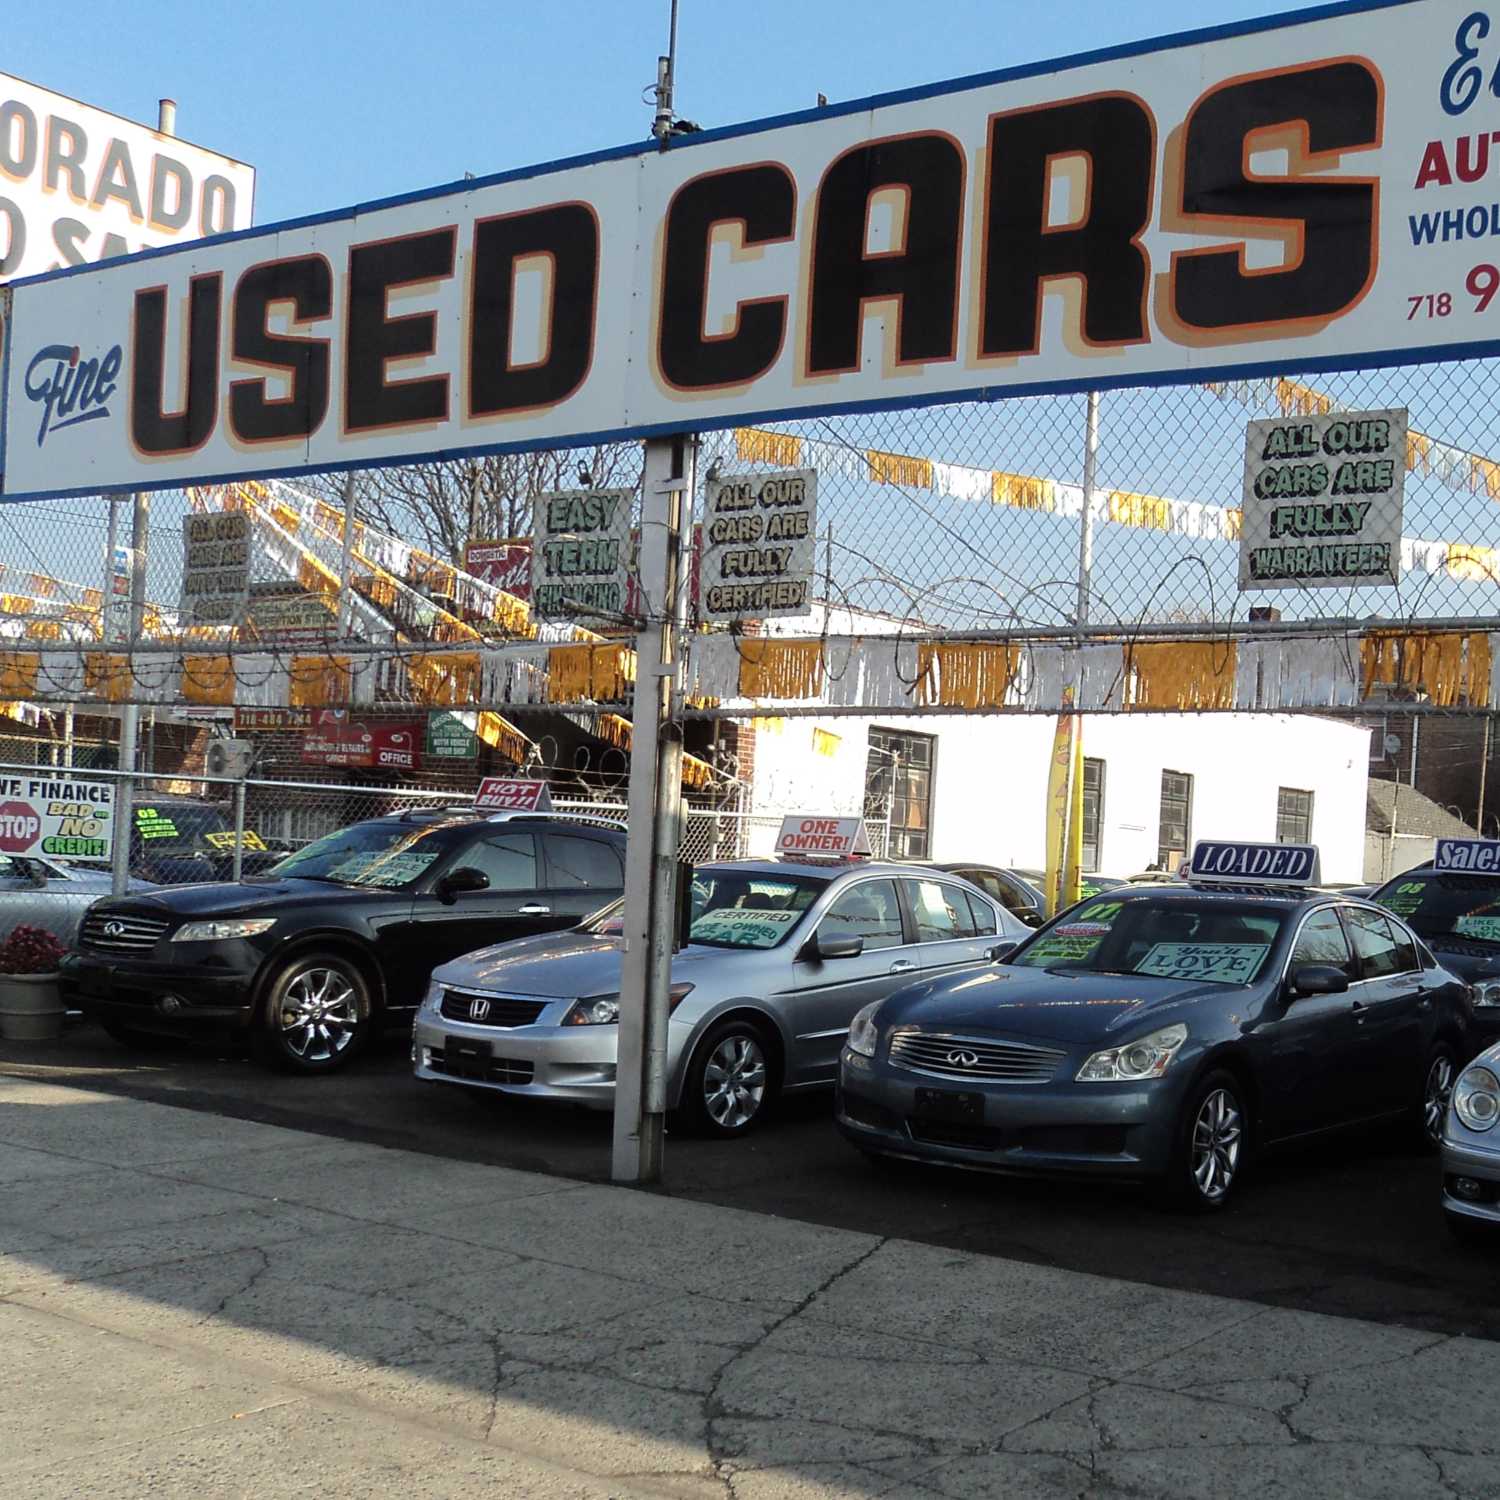 Used Cars Part 1, With Guest Alex